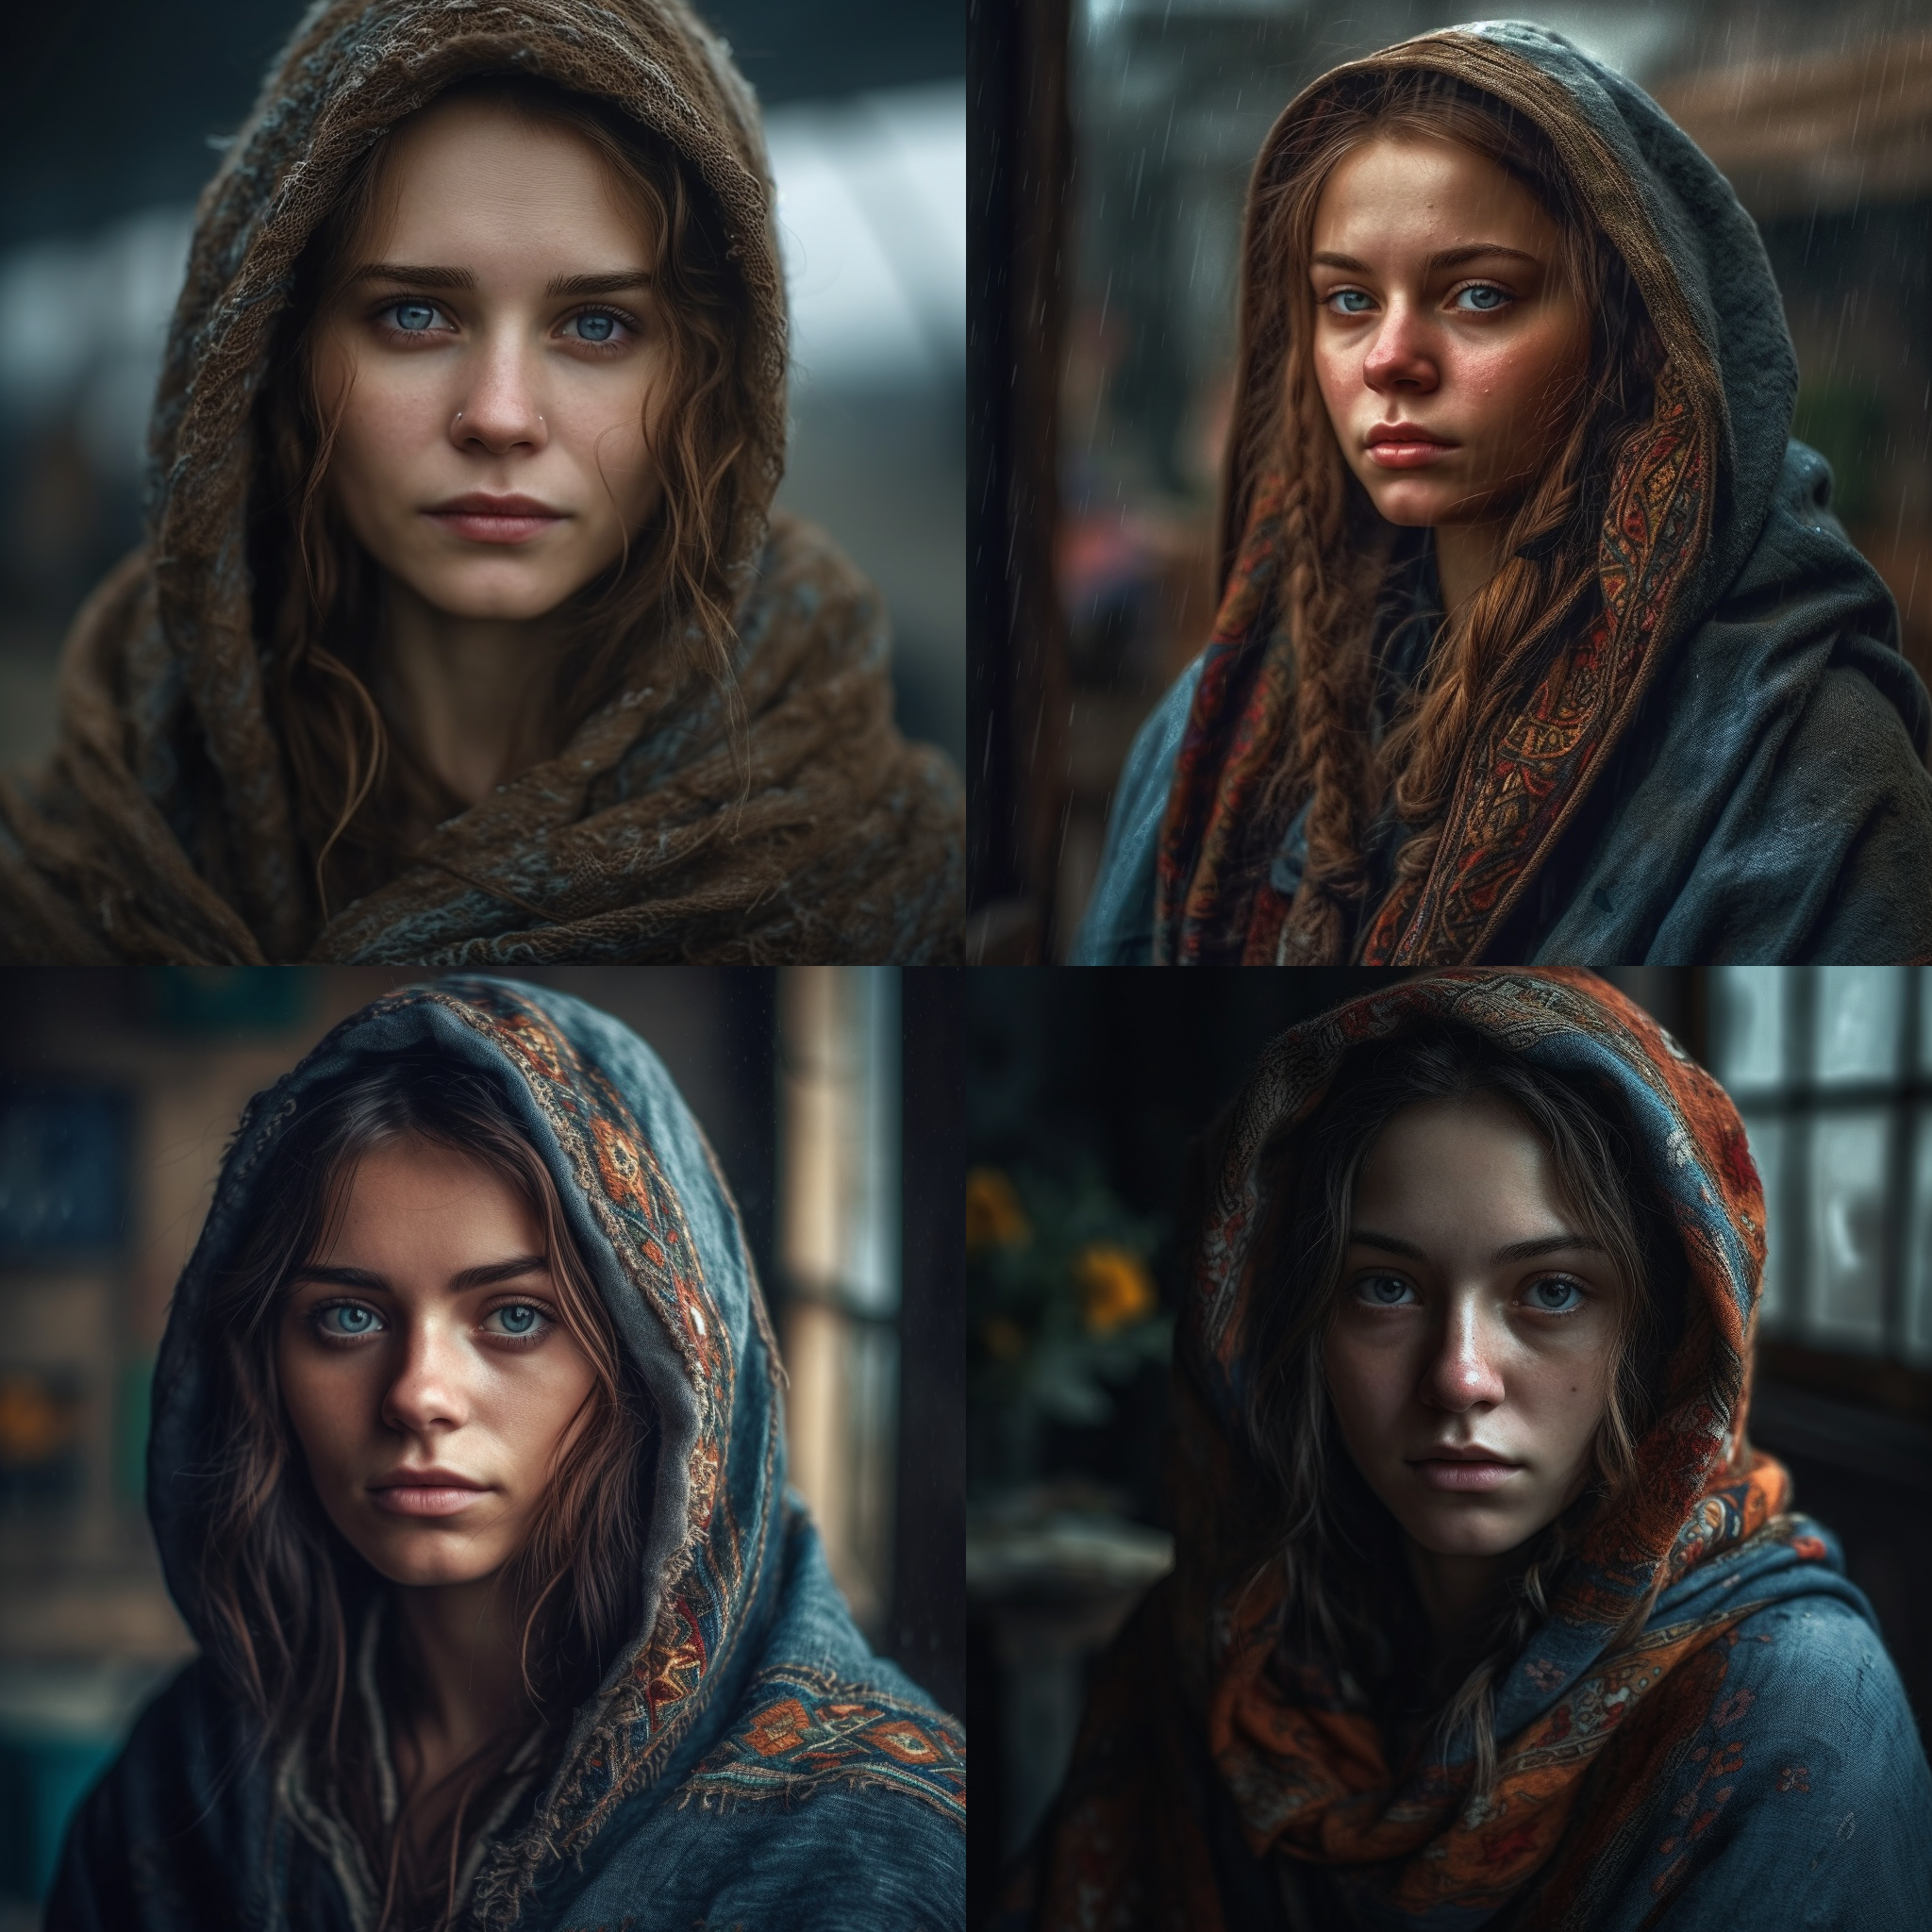 meowithai character beautiful Russian woman Overcast 8c147907 8a1d 4141 af67 fd0044d152f2